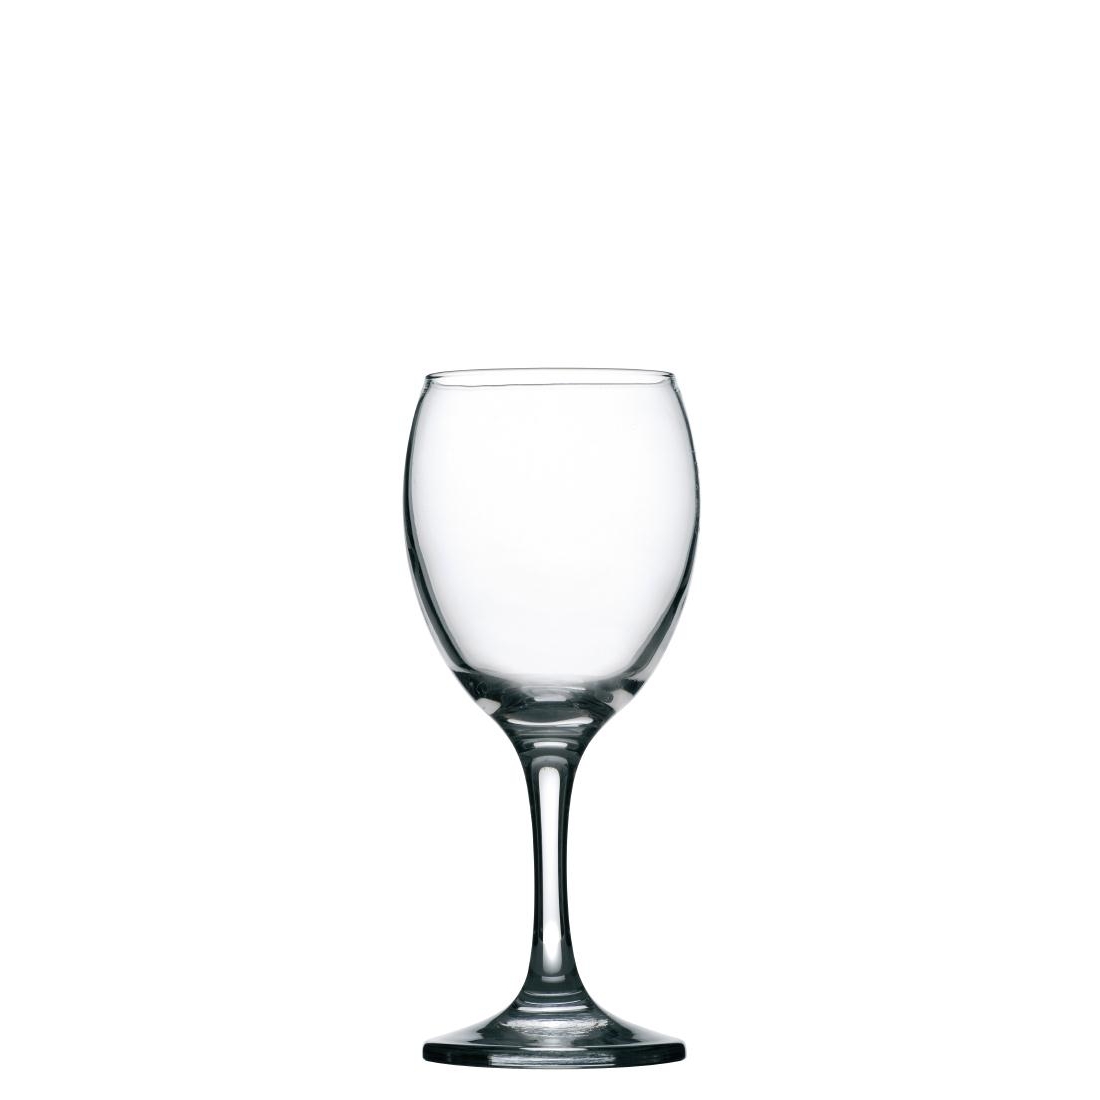 Utopia Imperial Wine Glasses 250ml CE Marked at 175ml